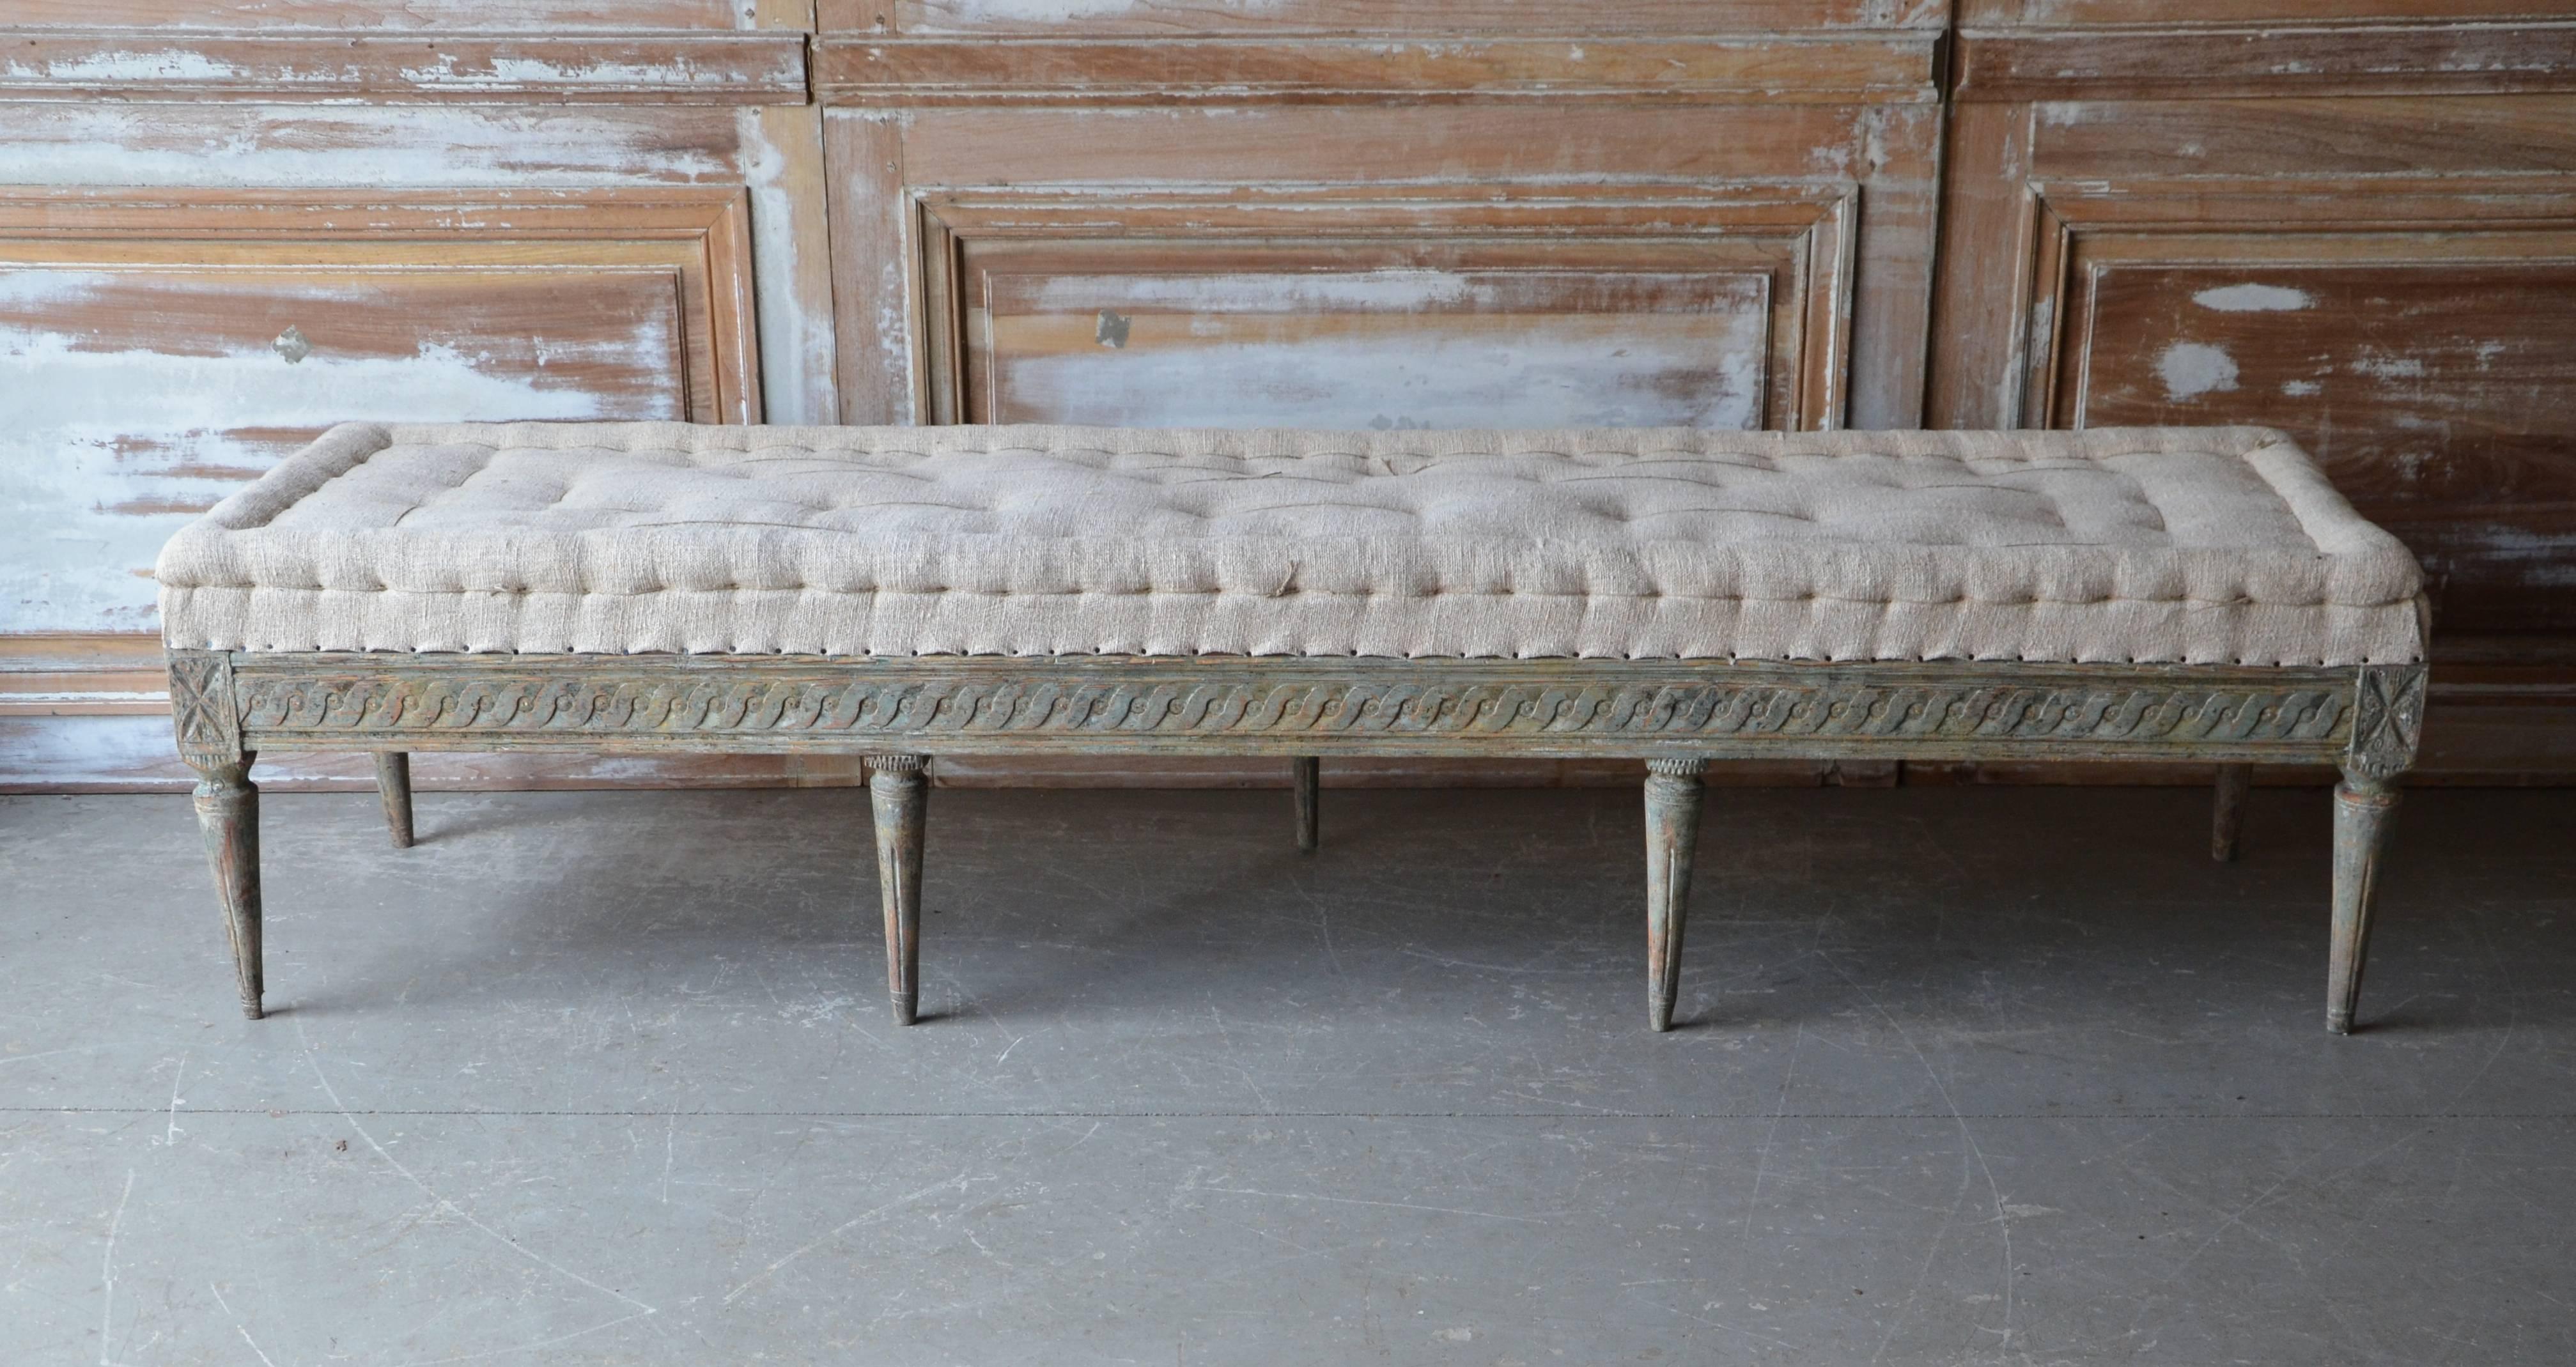 Swedish period Gustavian long bench, circa 1790, finished on three sides with richly decorated carvings on carved round fluted legs. Original blue/green time worn patina and upholstered in traditional way in antique hand-stitched linen. Timeless